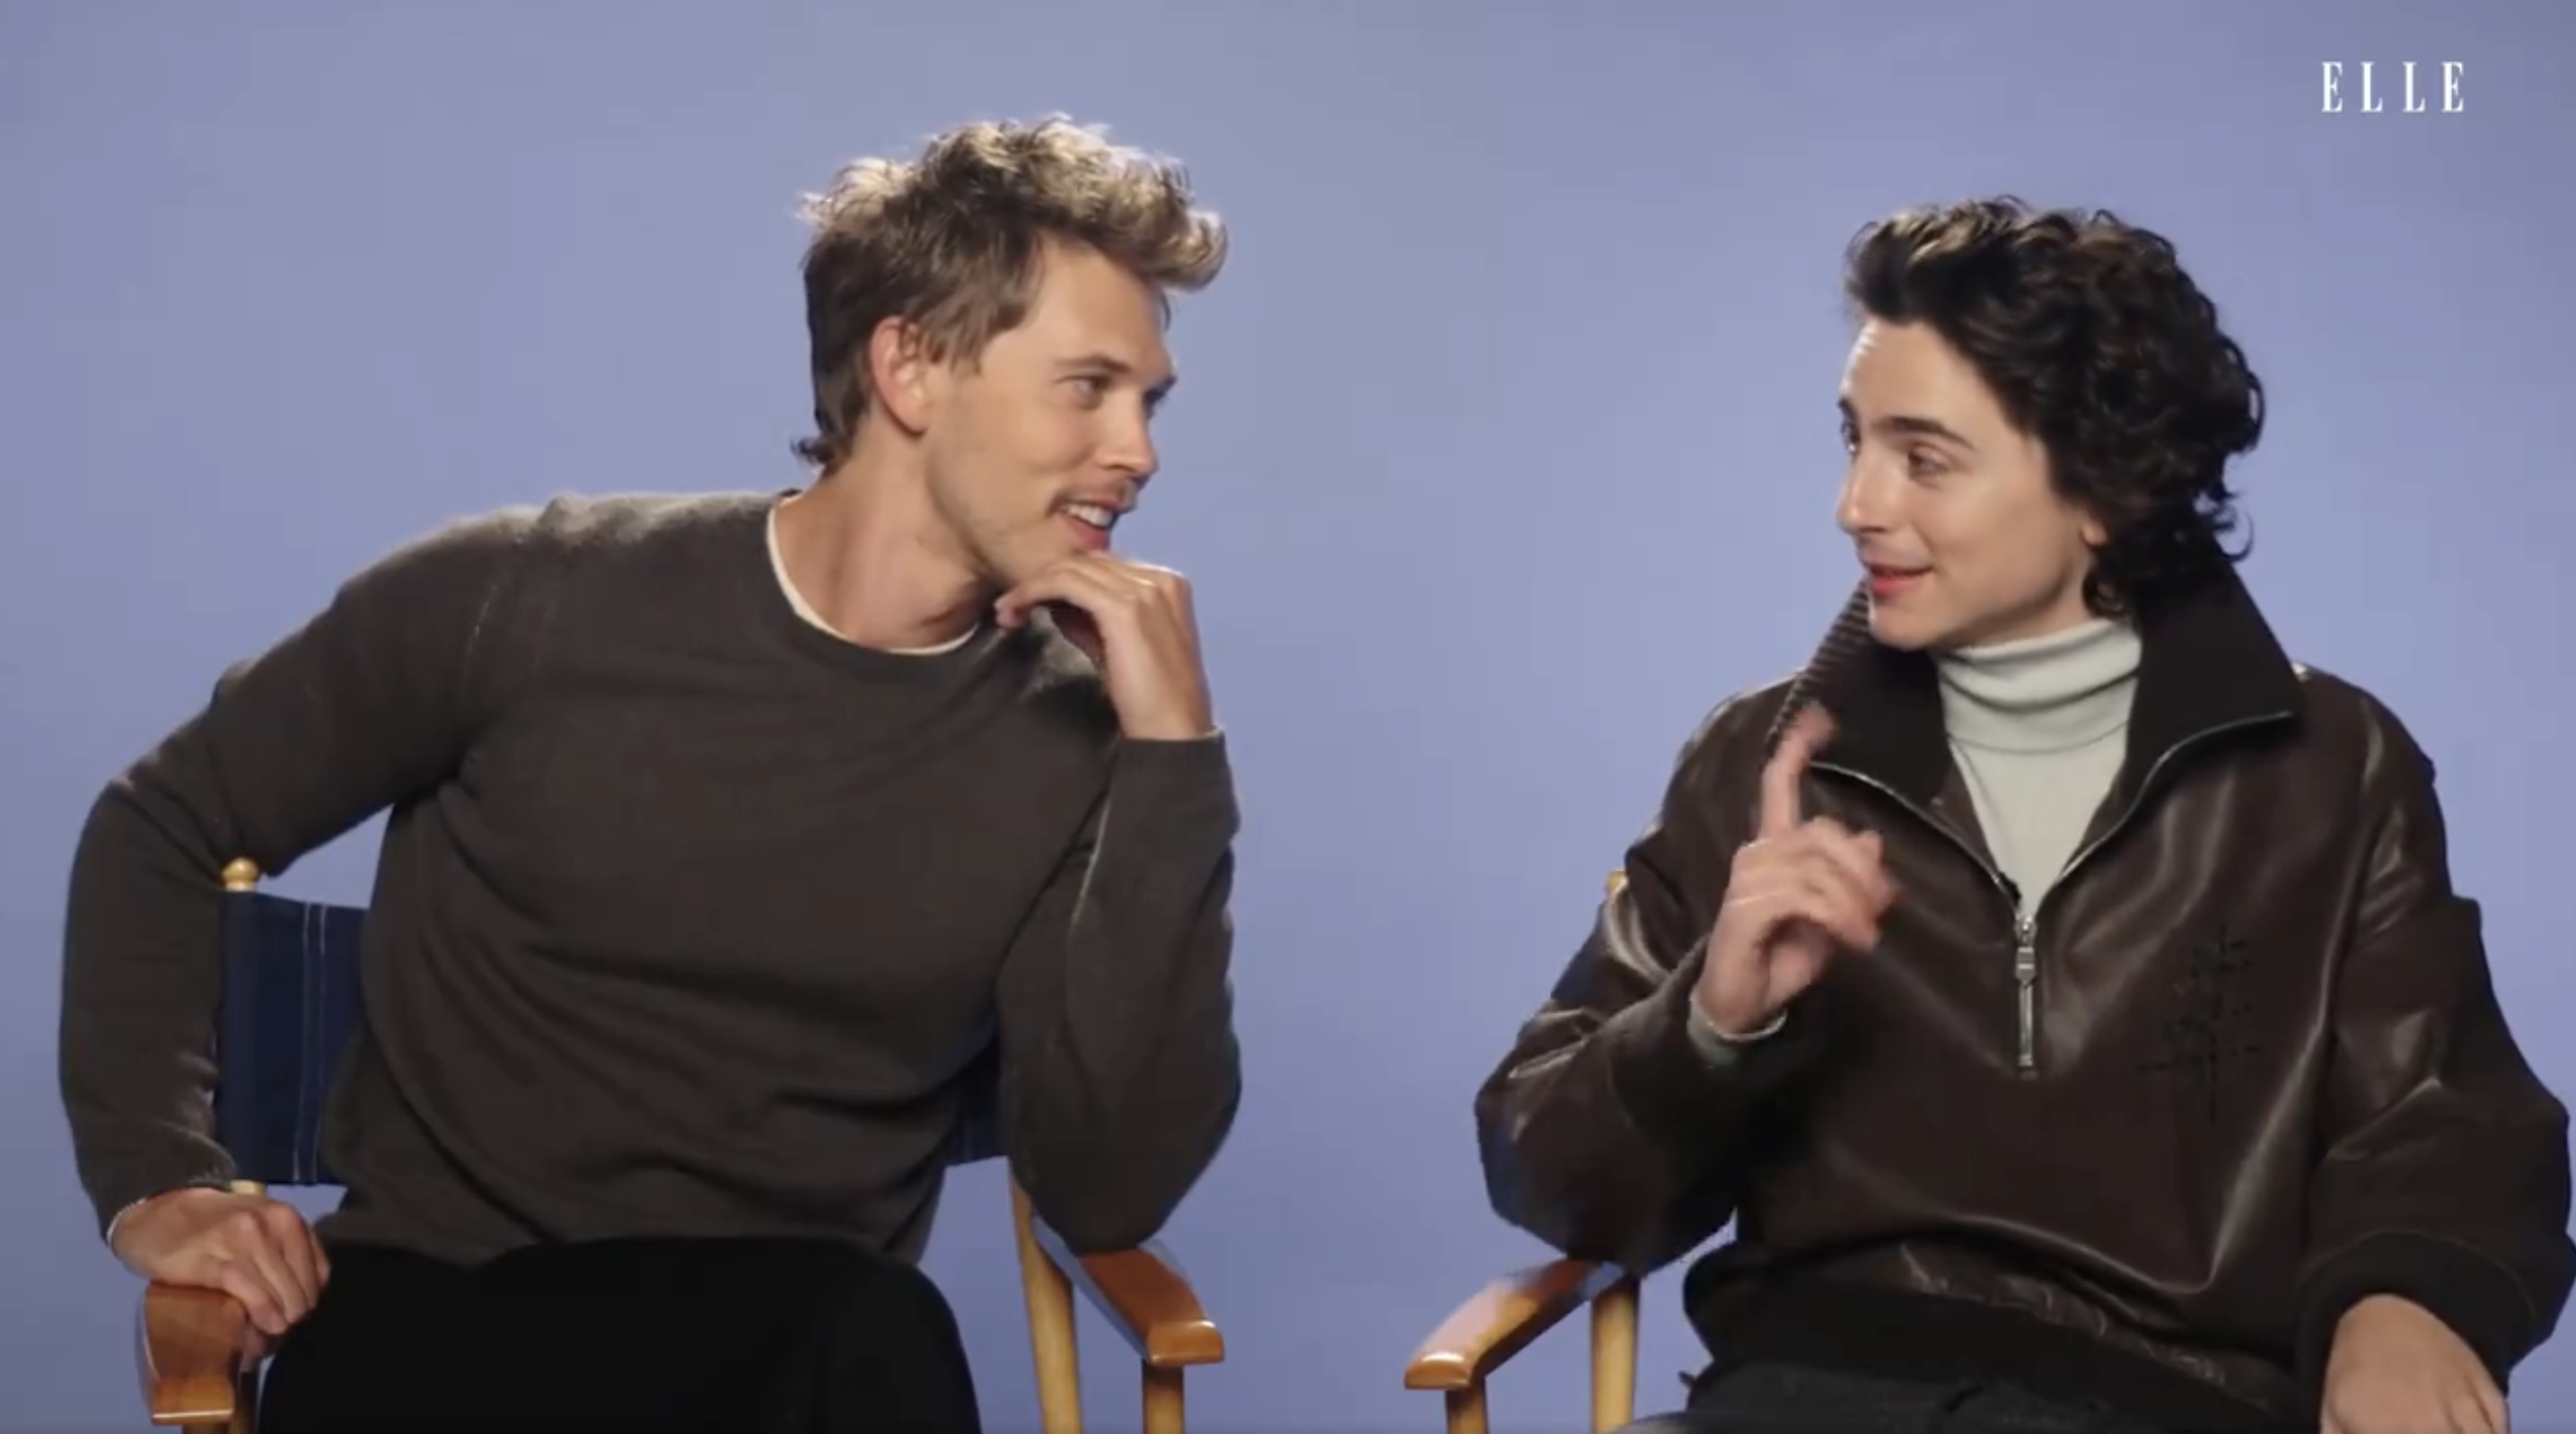 Timothée Chalamet and Austin Butler sitting, one in a sweater and jeans, the other in a leather jacket and turtleneck, engaging in conversation